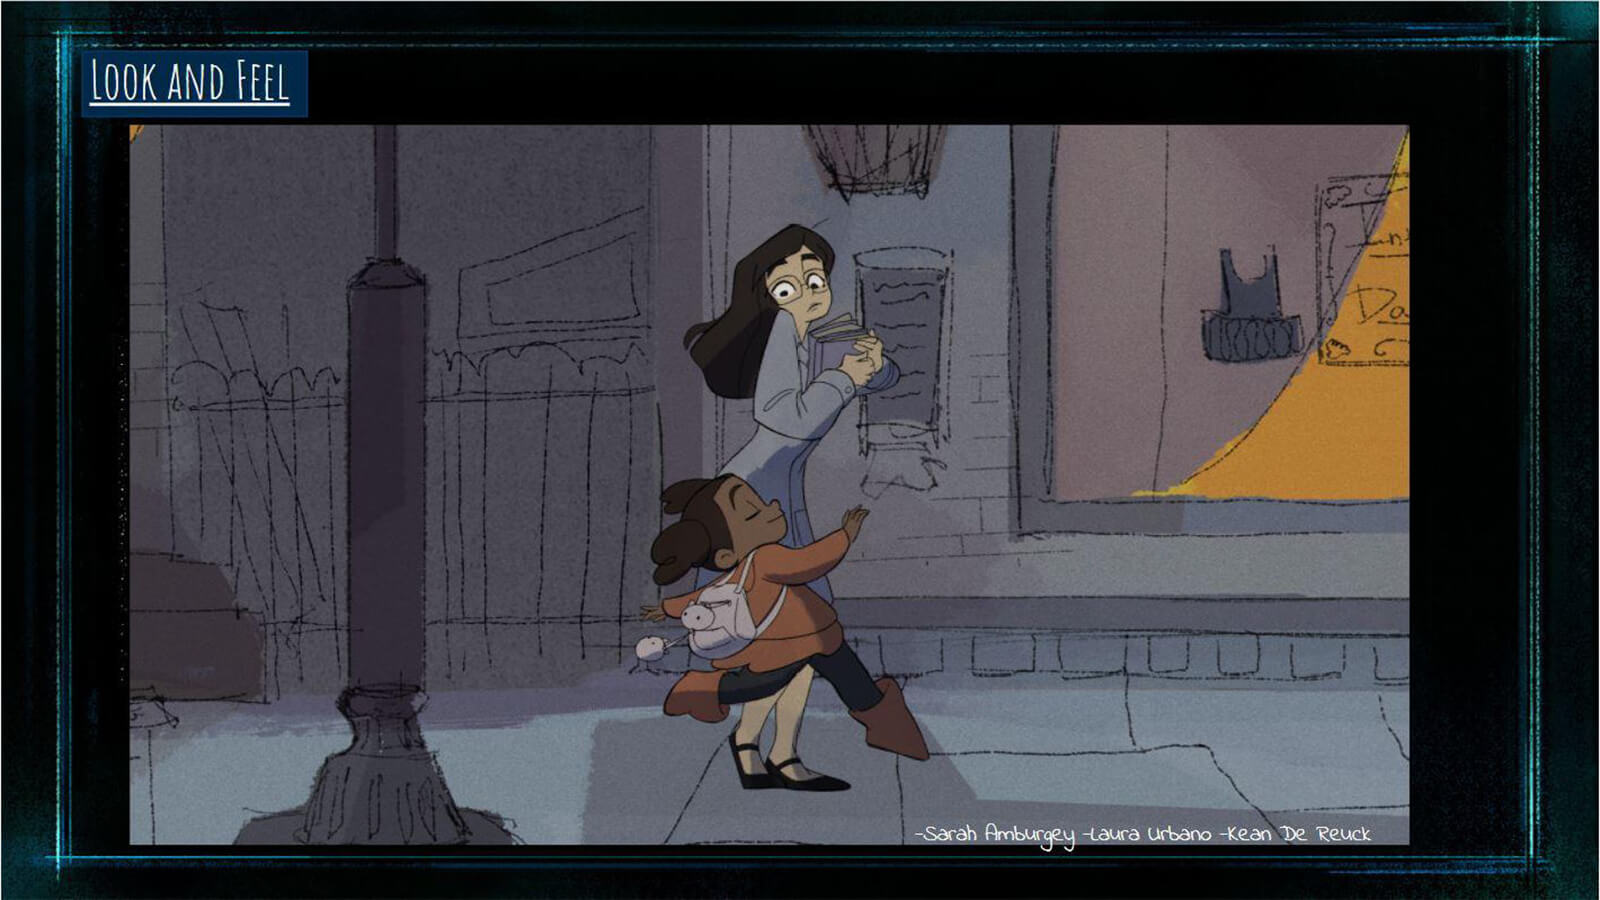 A "Look and Feel" slide, featuring a drawing for the film's two main characters passing each other on the sidewalk.